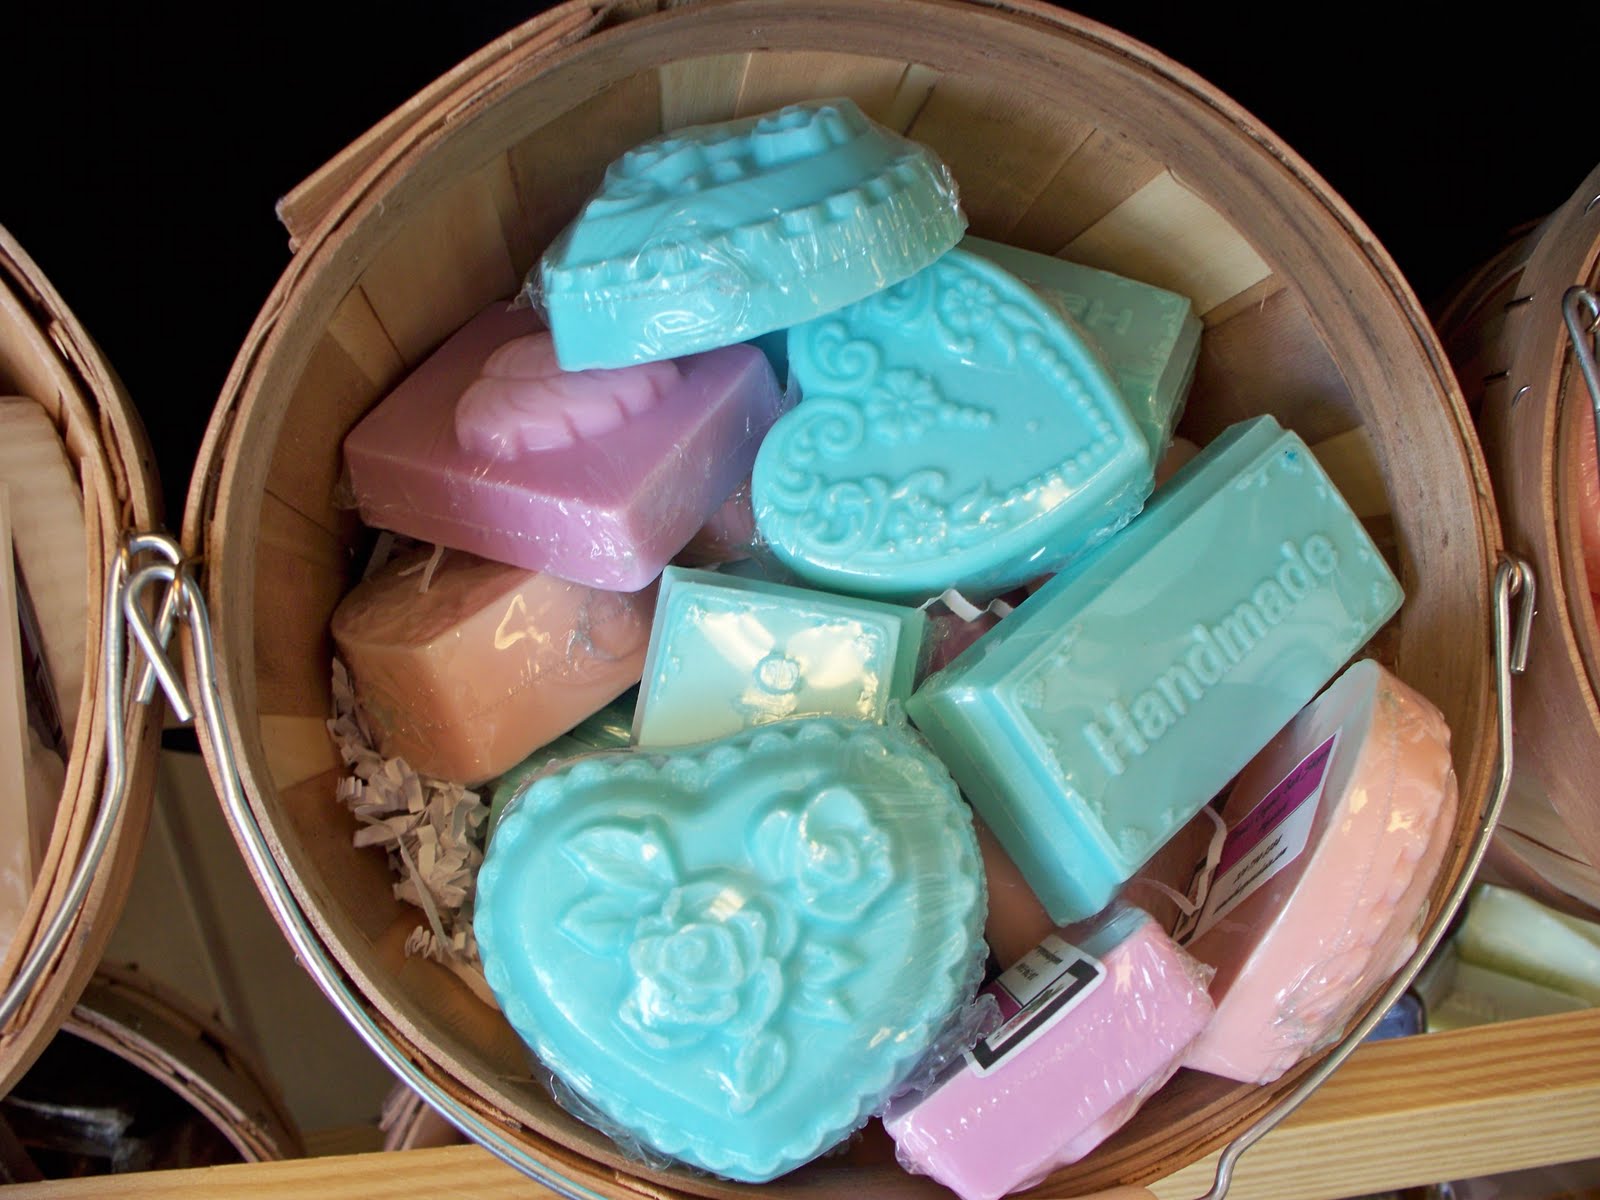 Heart to Heart Gifts and Home Decor: Hand-made decorative soaps - just